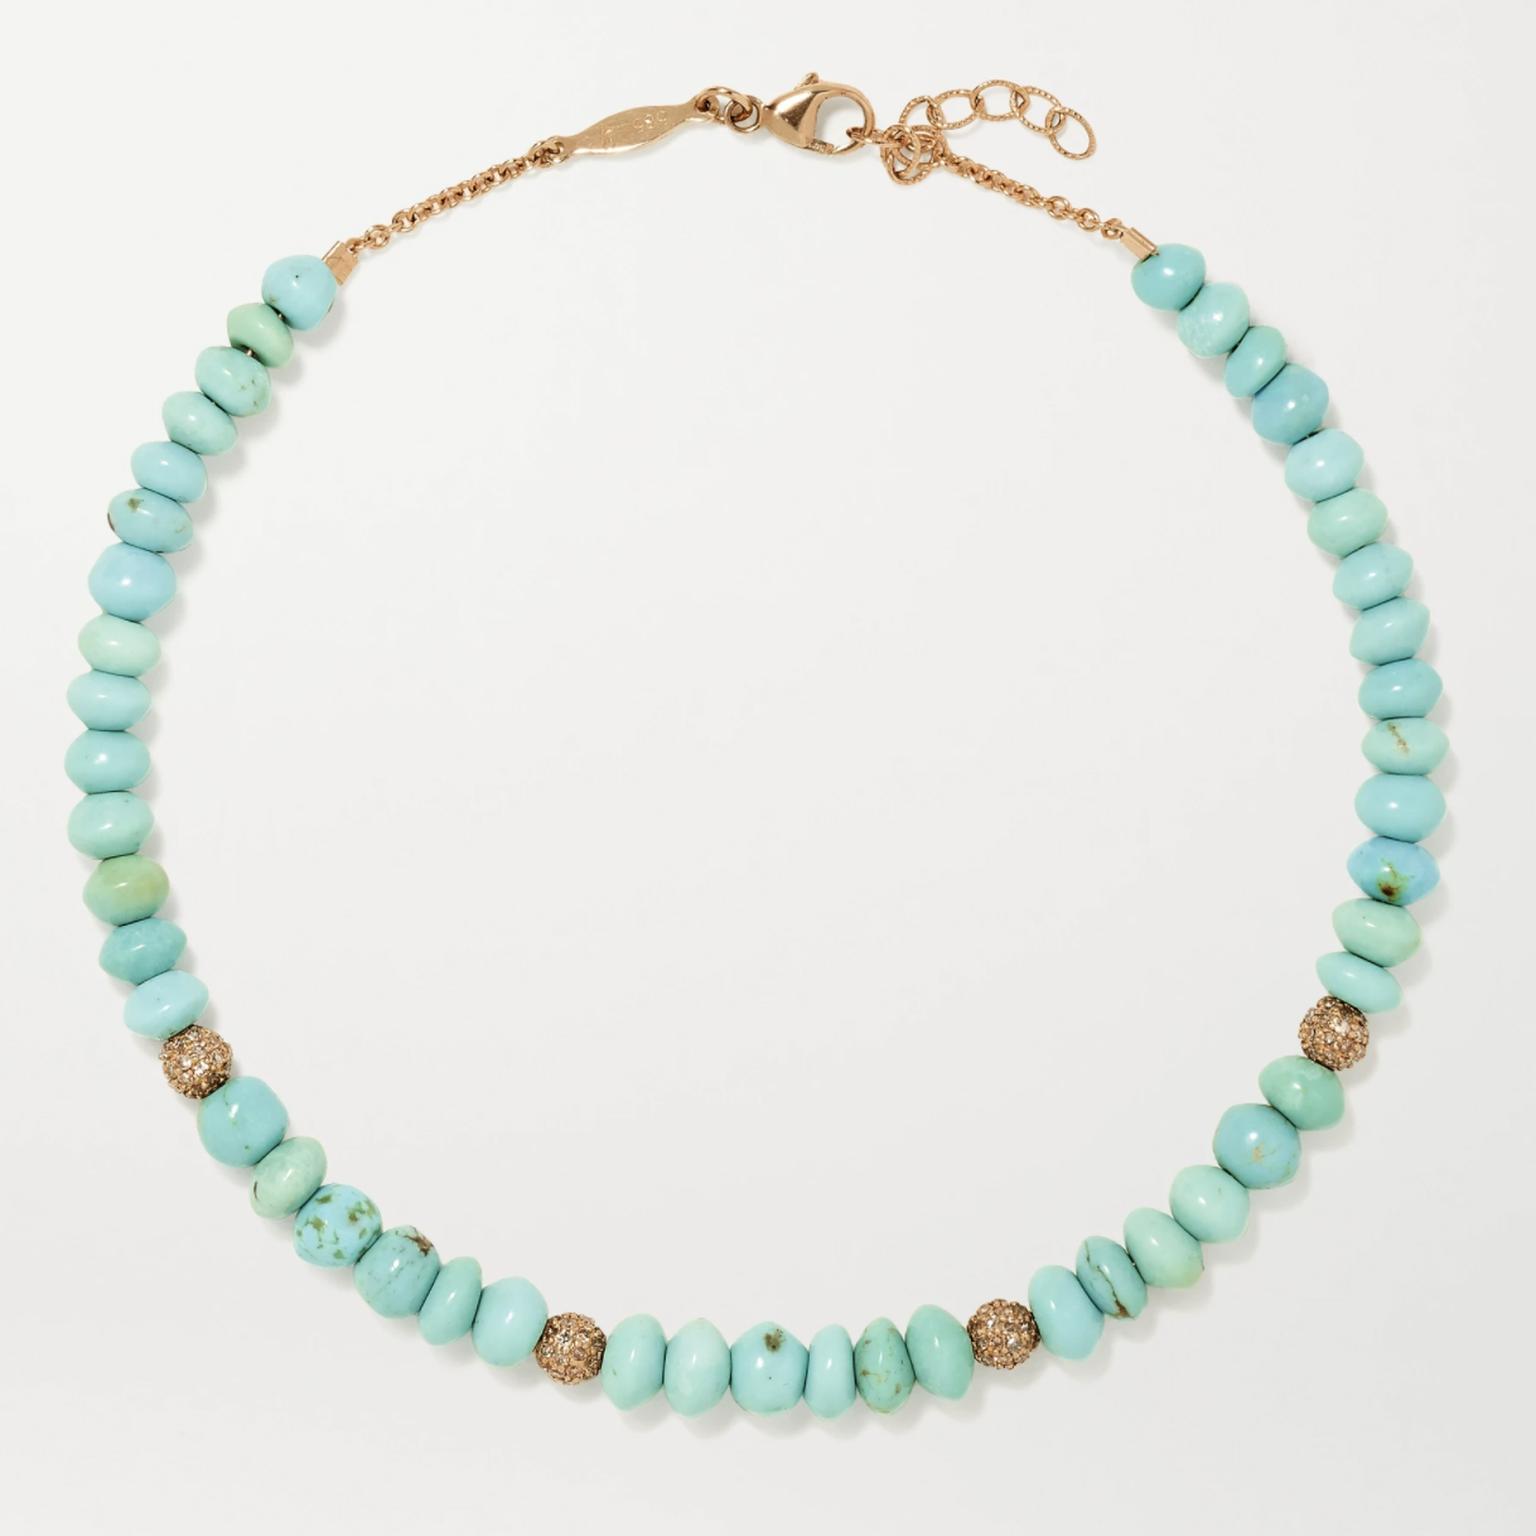 Turquoise anklet by Jacquie Aiche 